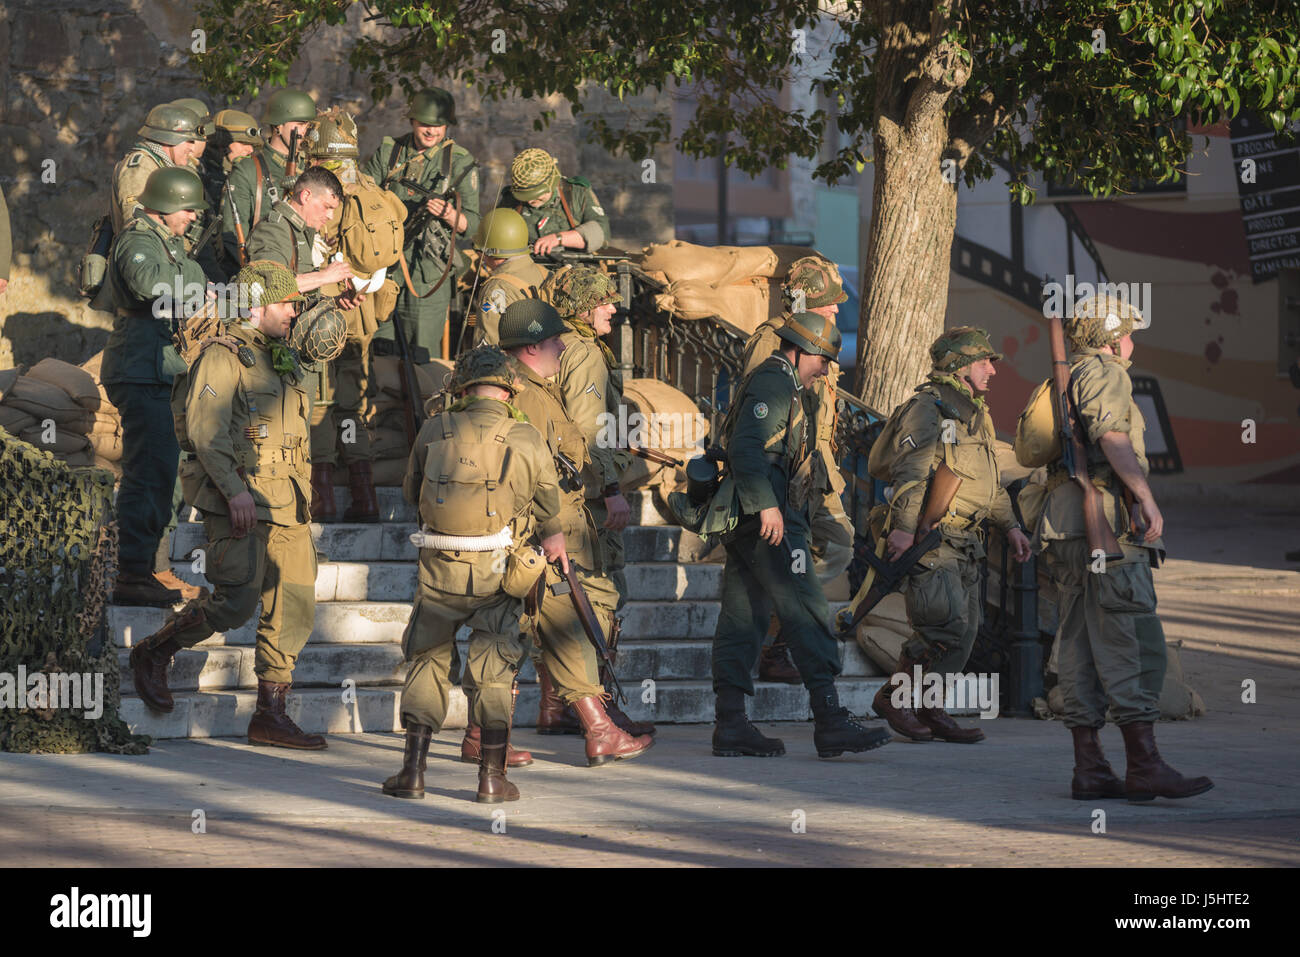 Belorado, Spain - May 6, 2017: soldiers during World war 2 reenactment,  Military historical reconstruction of the battle of Salerno 1943, on May 6, 2 Stock Photo